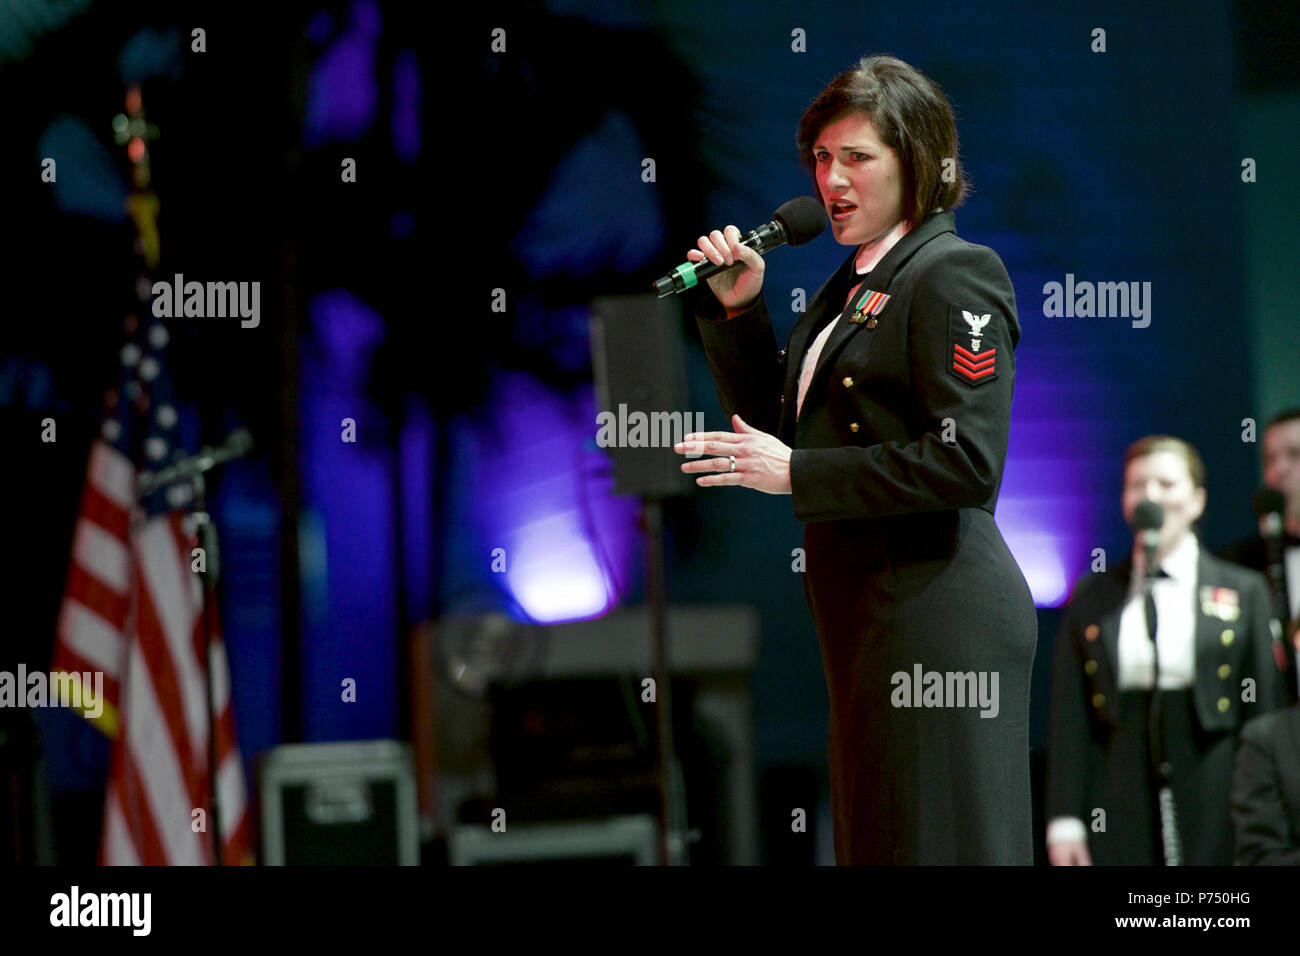 HOLLYWOOD, Fla. (March 1, 2015) Musician 1st Class Maia Rodriguez, of Cleveland, Ohio, performs with the U.S. Navy Band at the ArtsPark Amphitheater in Hollywood, Fla. The U.S. Navy Band is touring the Southeast United States, with performances in 32 cities. Stock Photo